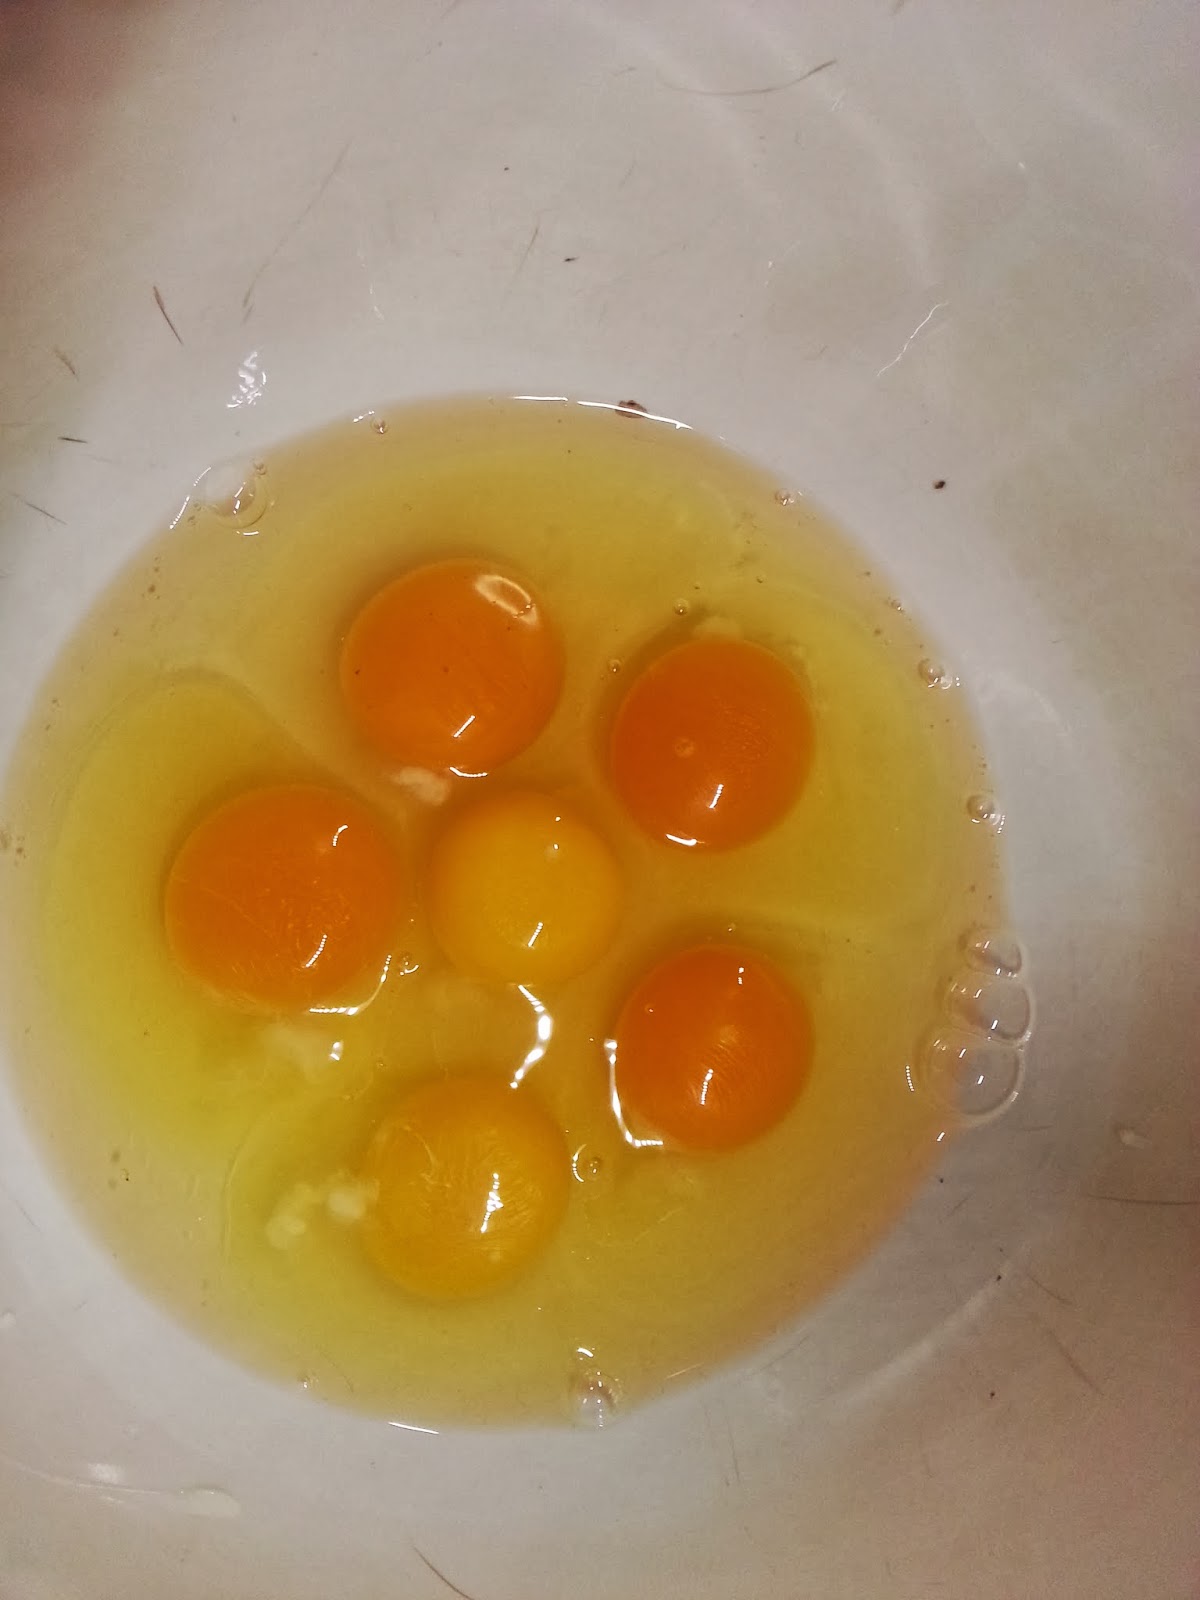 Comparing eggs from store and our chickens